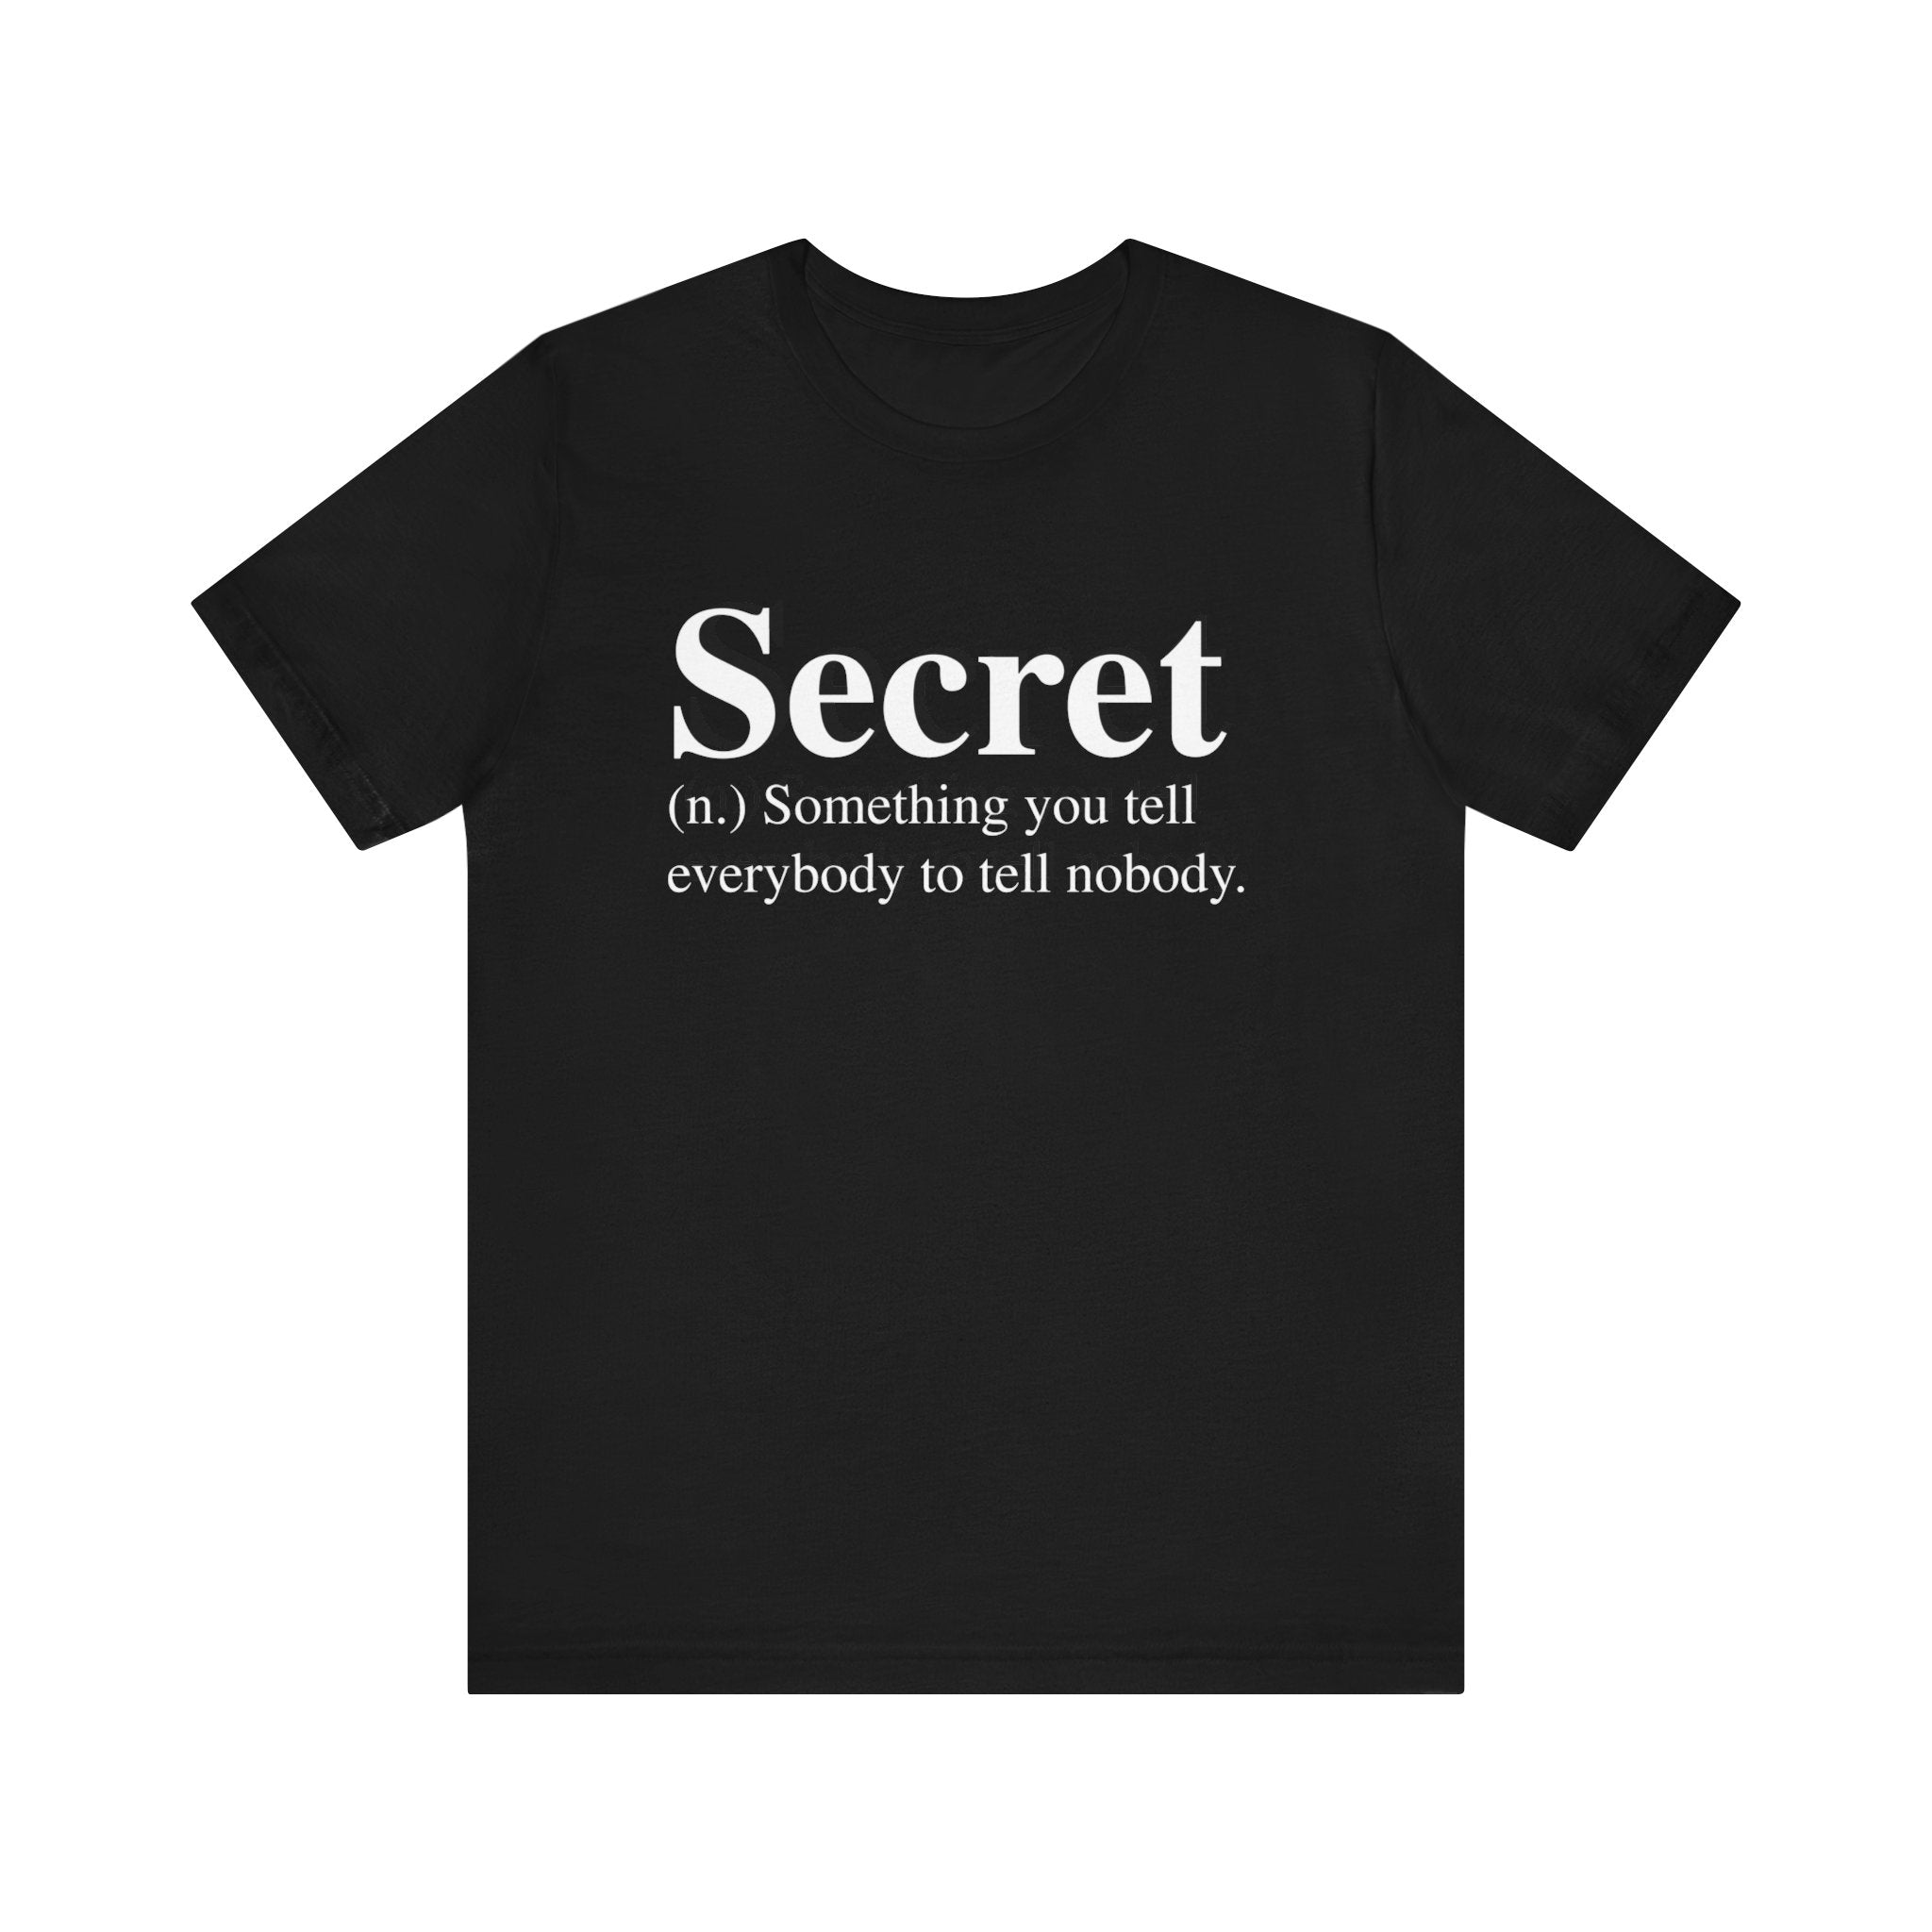 Black Secret T-Shirt with quality print and white text that reads "secret (n.) something you tell everybody to tell nobody.